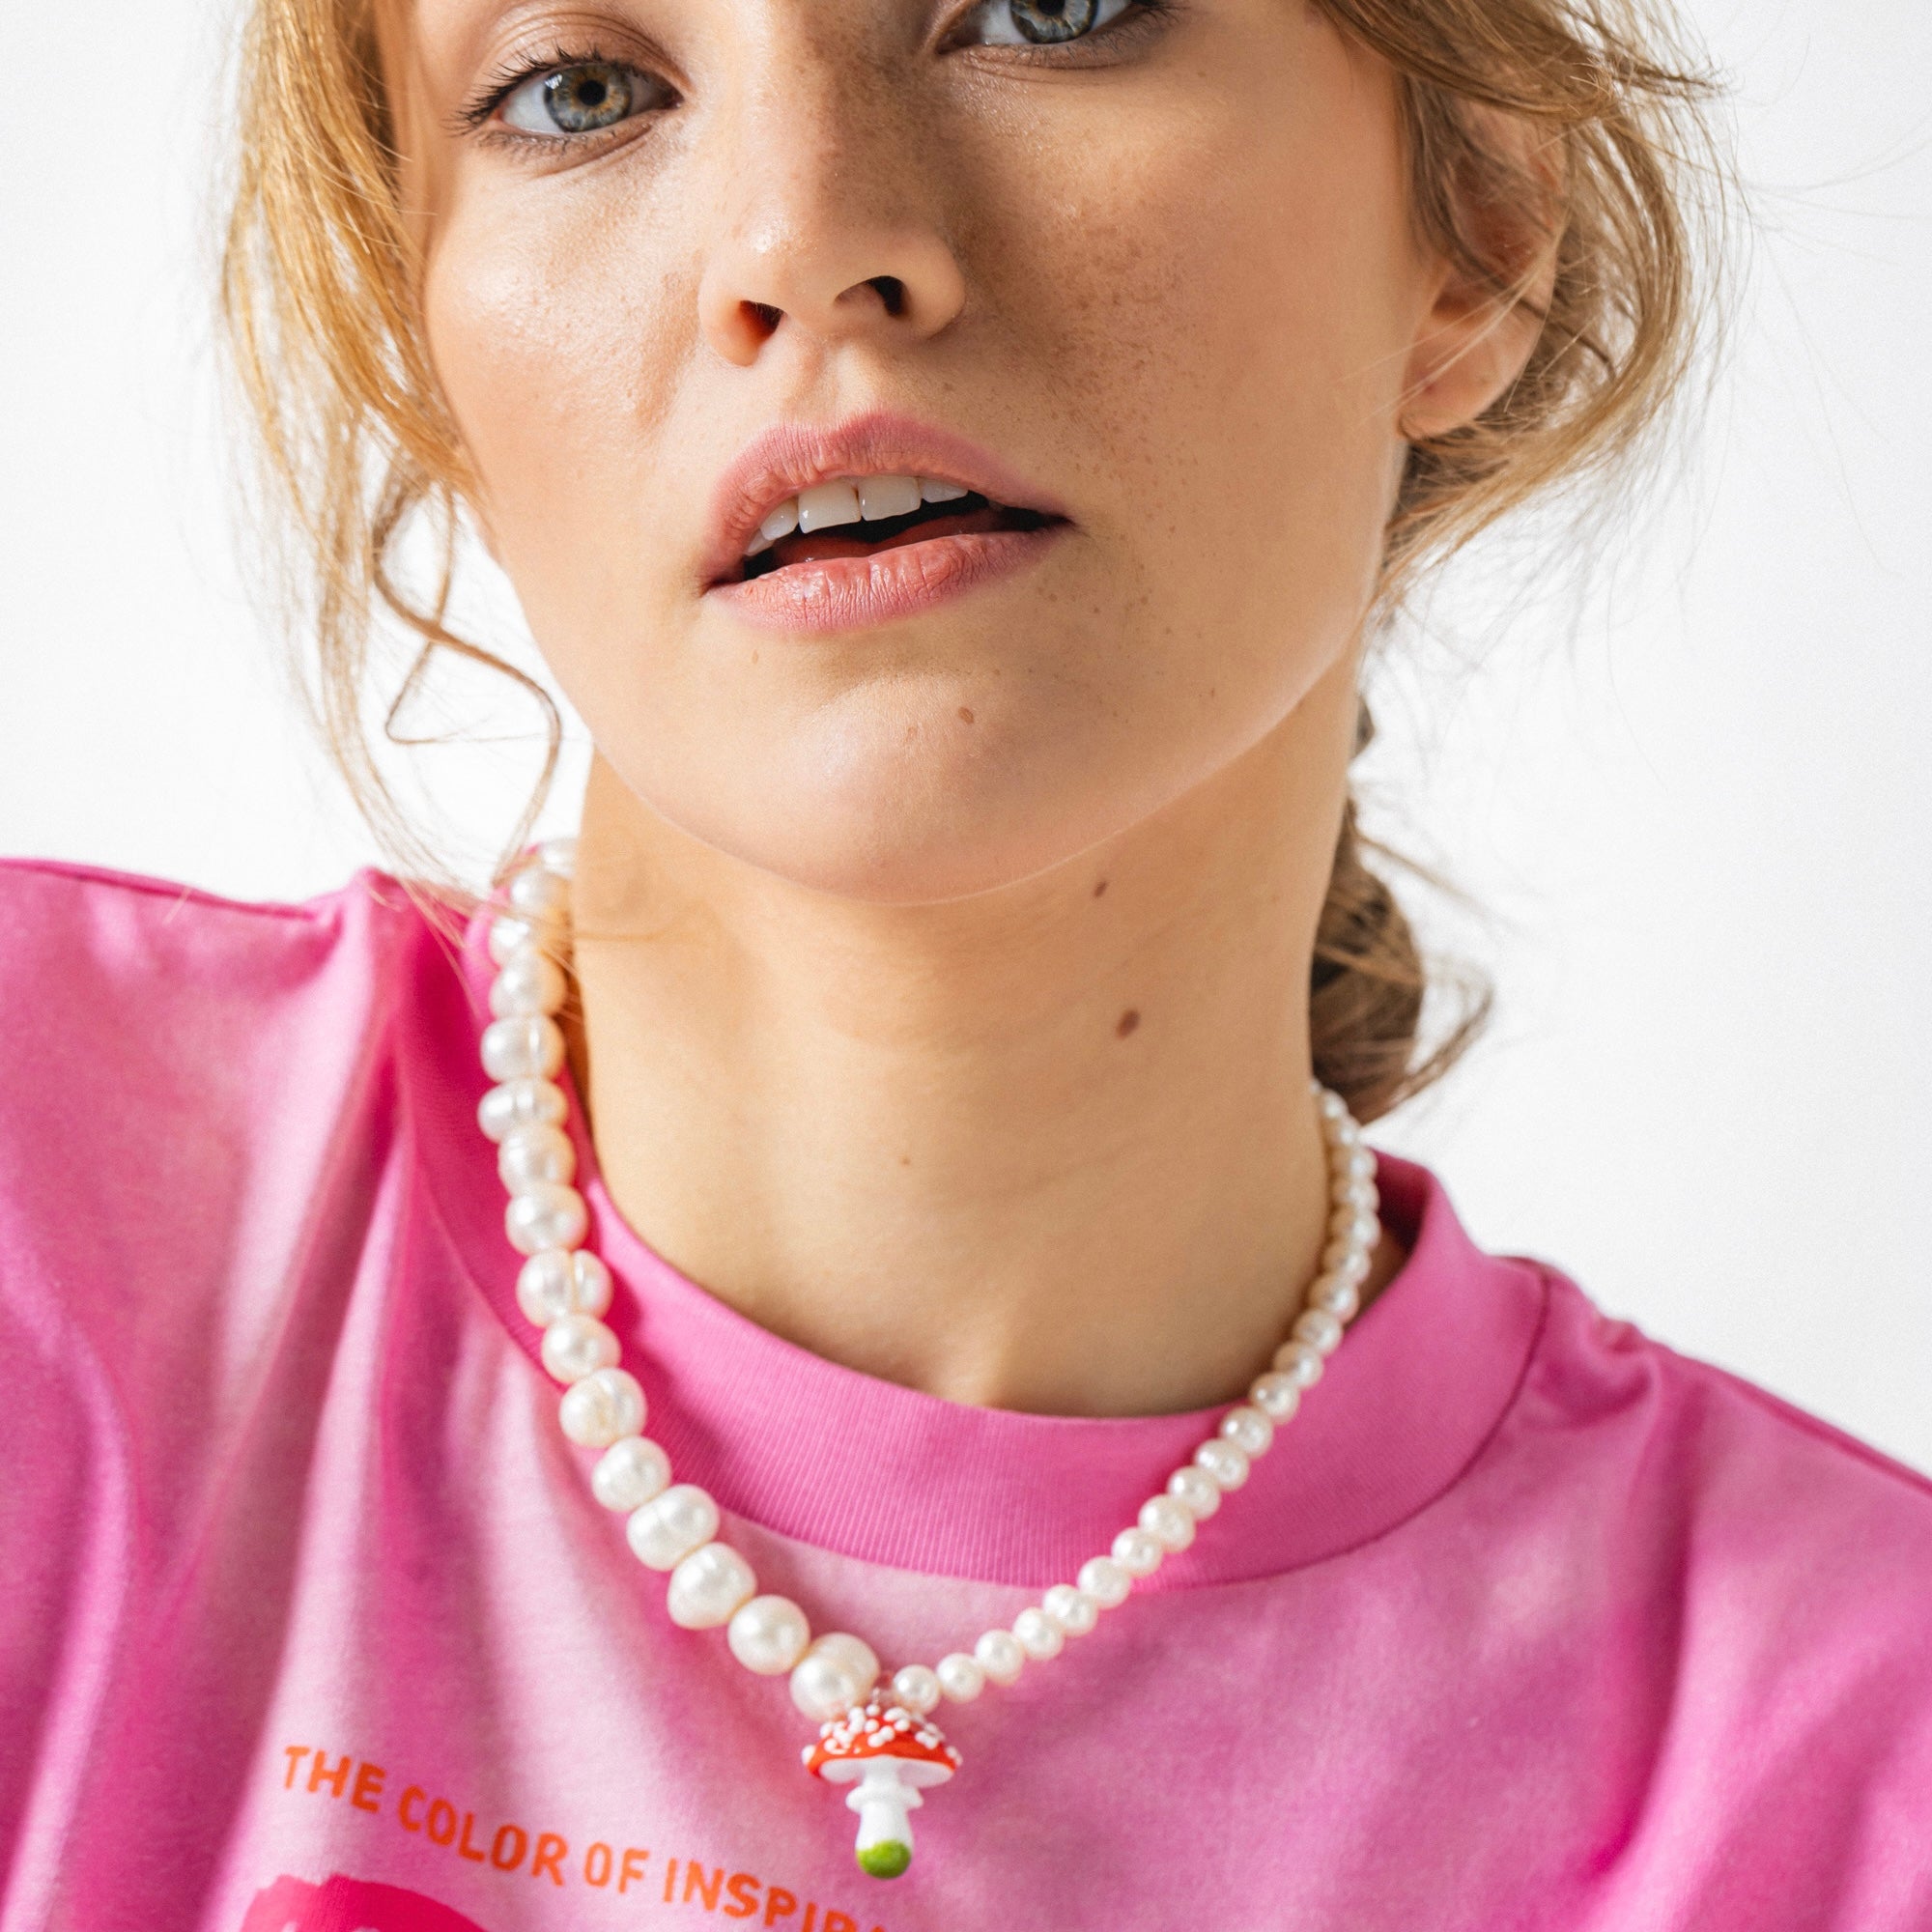 model wearing a mushroom pendant and pearls necklace